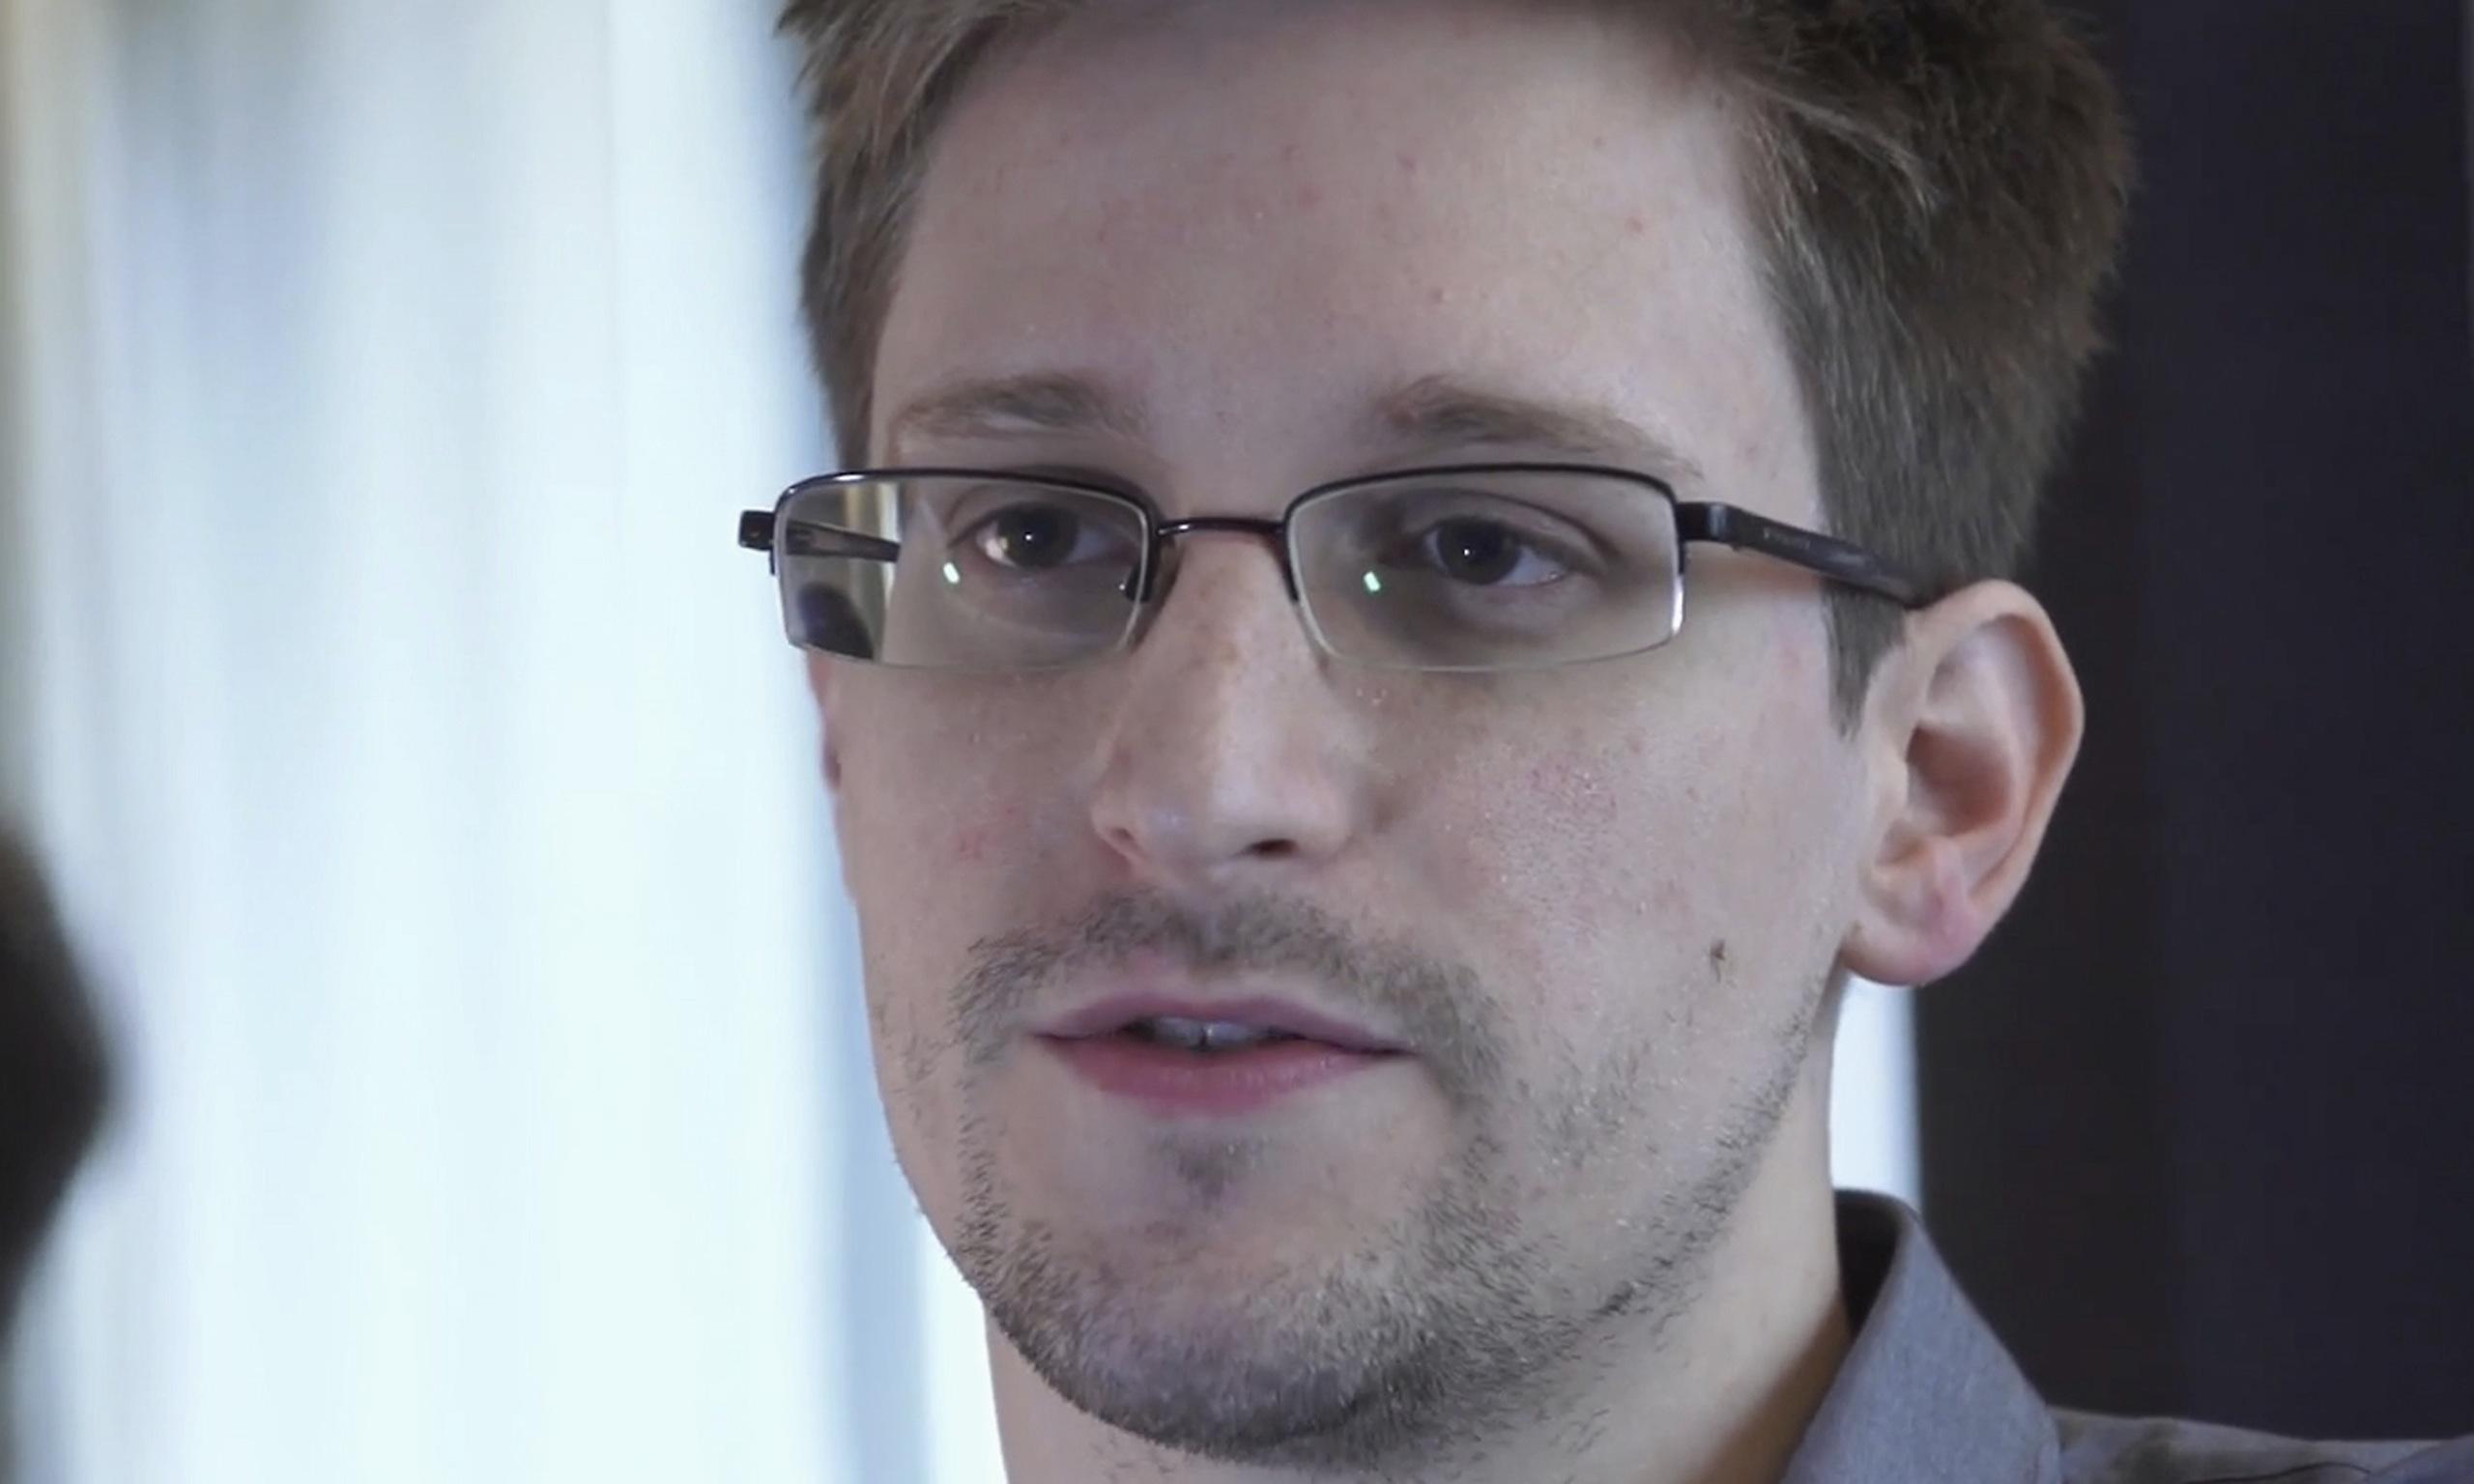 Awesome Edward Snowden HD Wallpaper Free Download